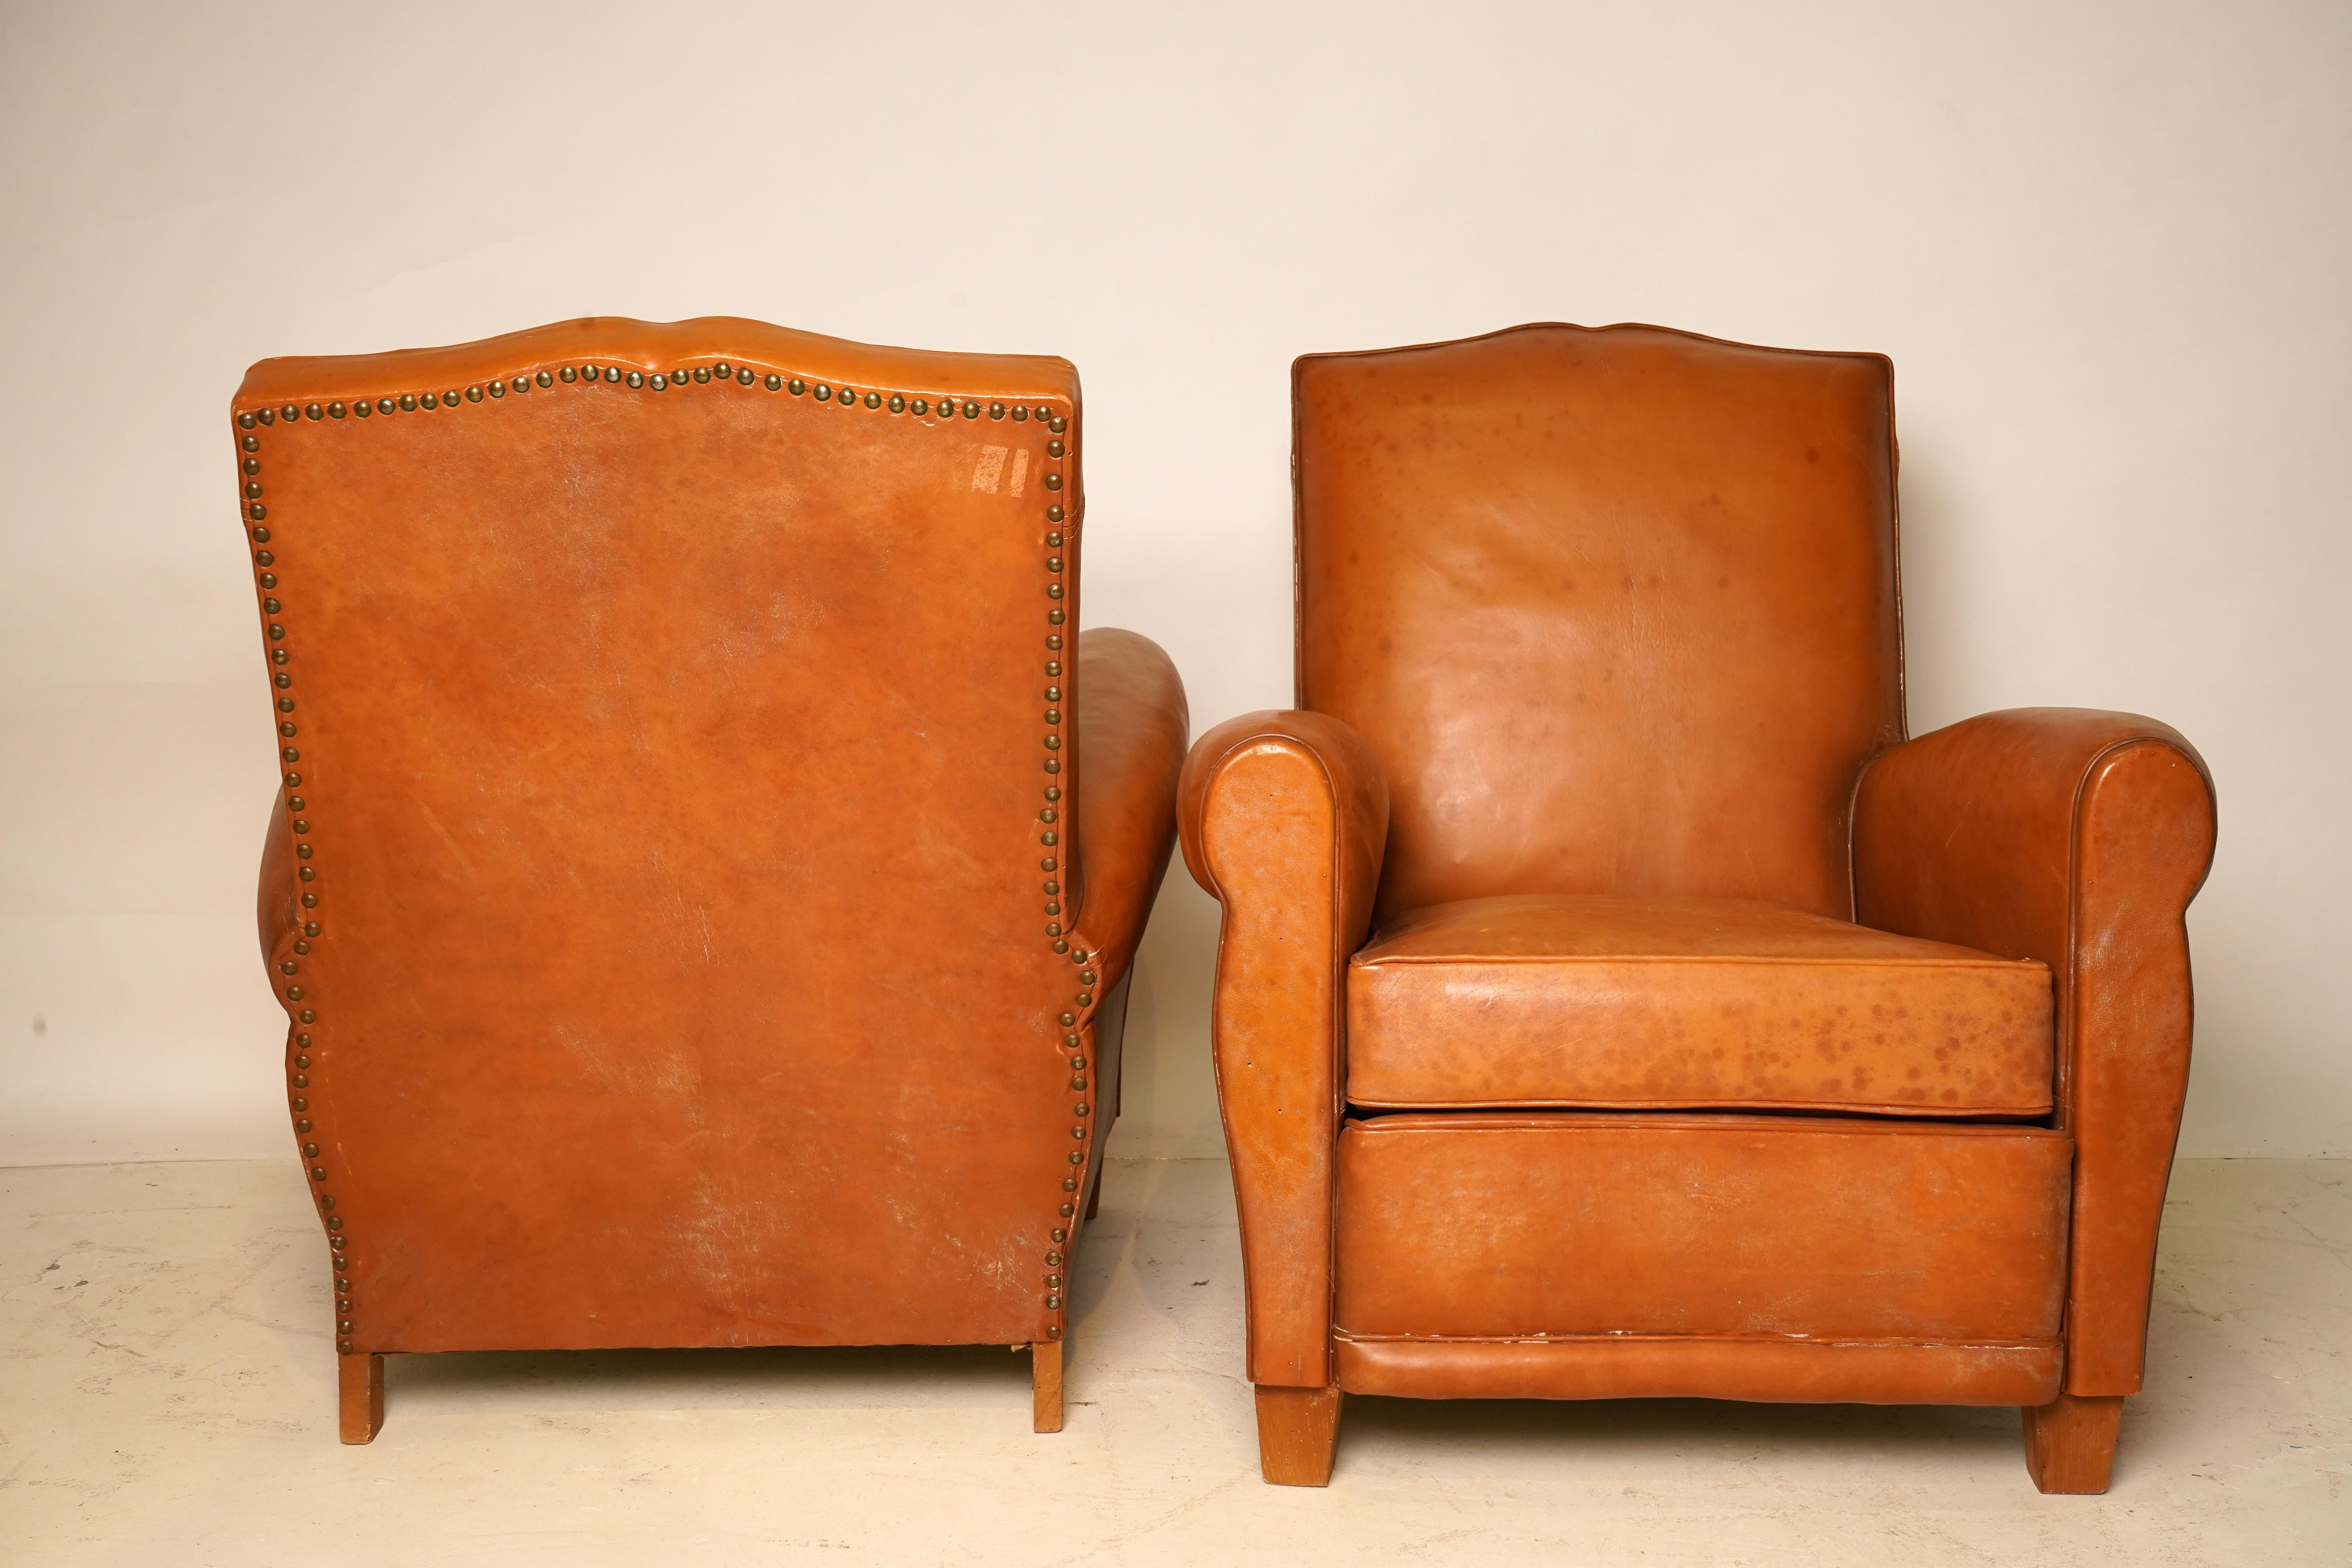 20th Century C. 1940 Pair of French Leather Art Deco Club Chairs